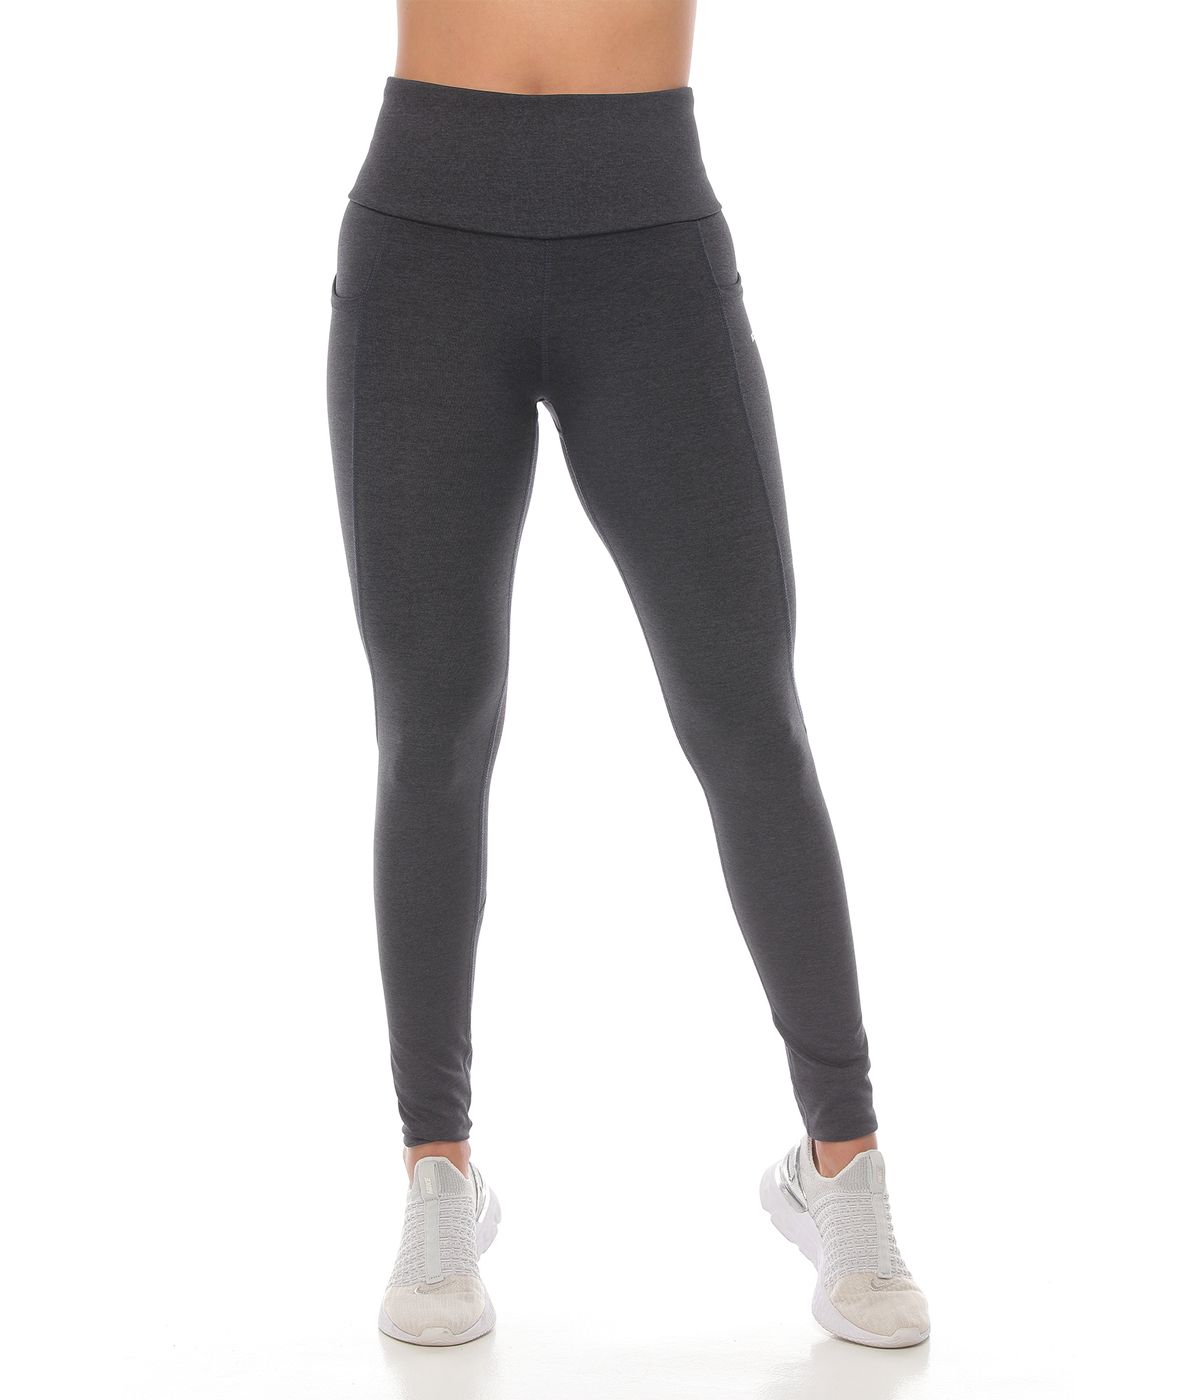 Licra deportiva para mujer, color gris oscuro - racketball movil